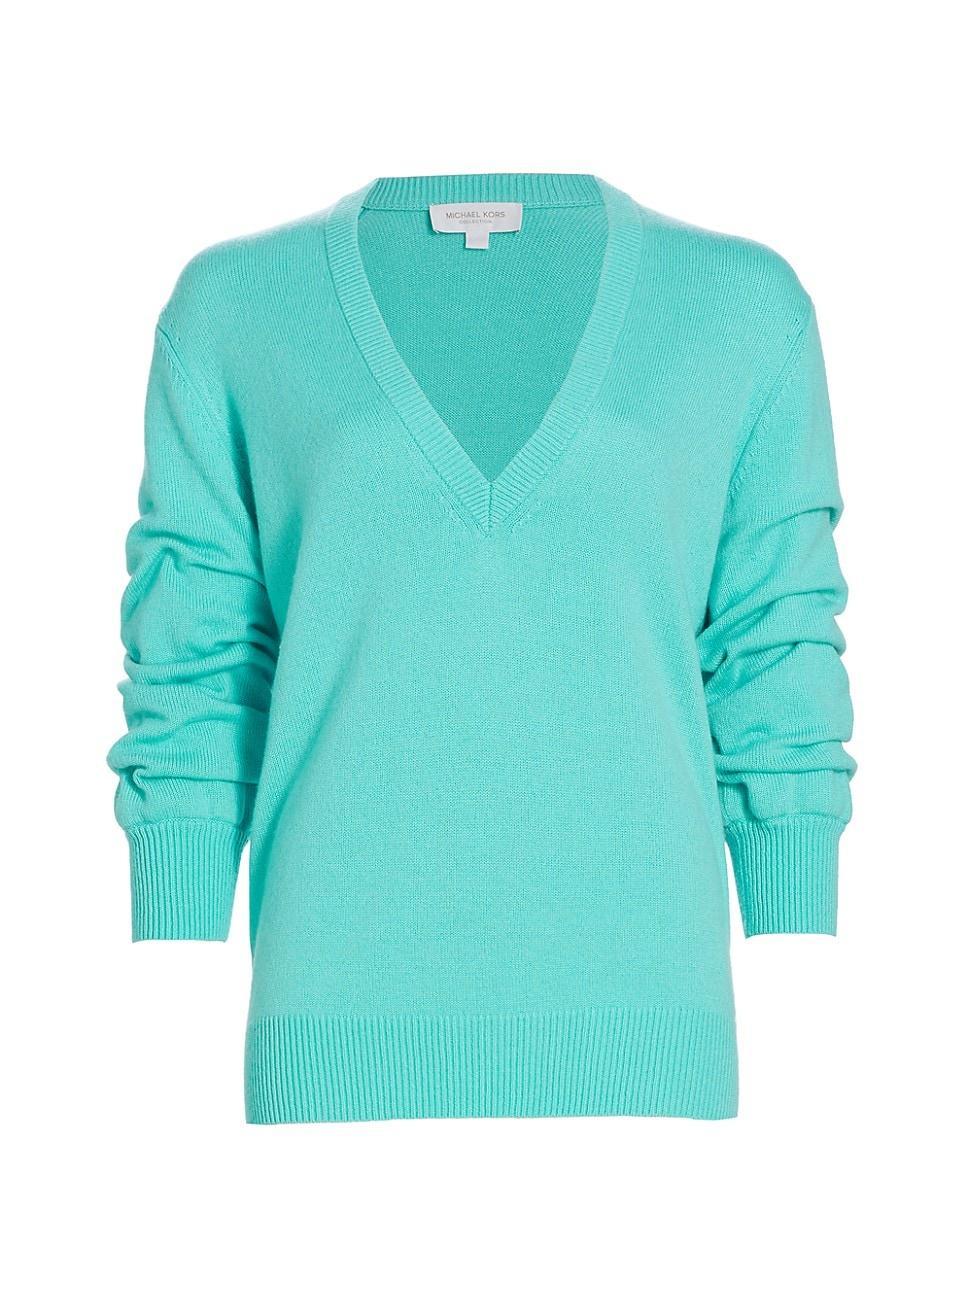 Womens Cashmere Ruched-Sleeve Sweater Product Image